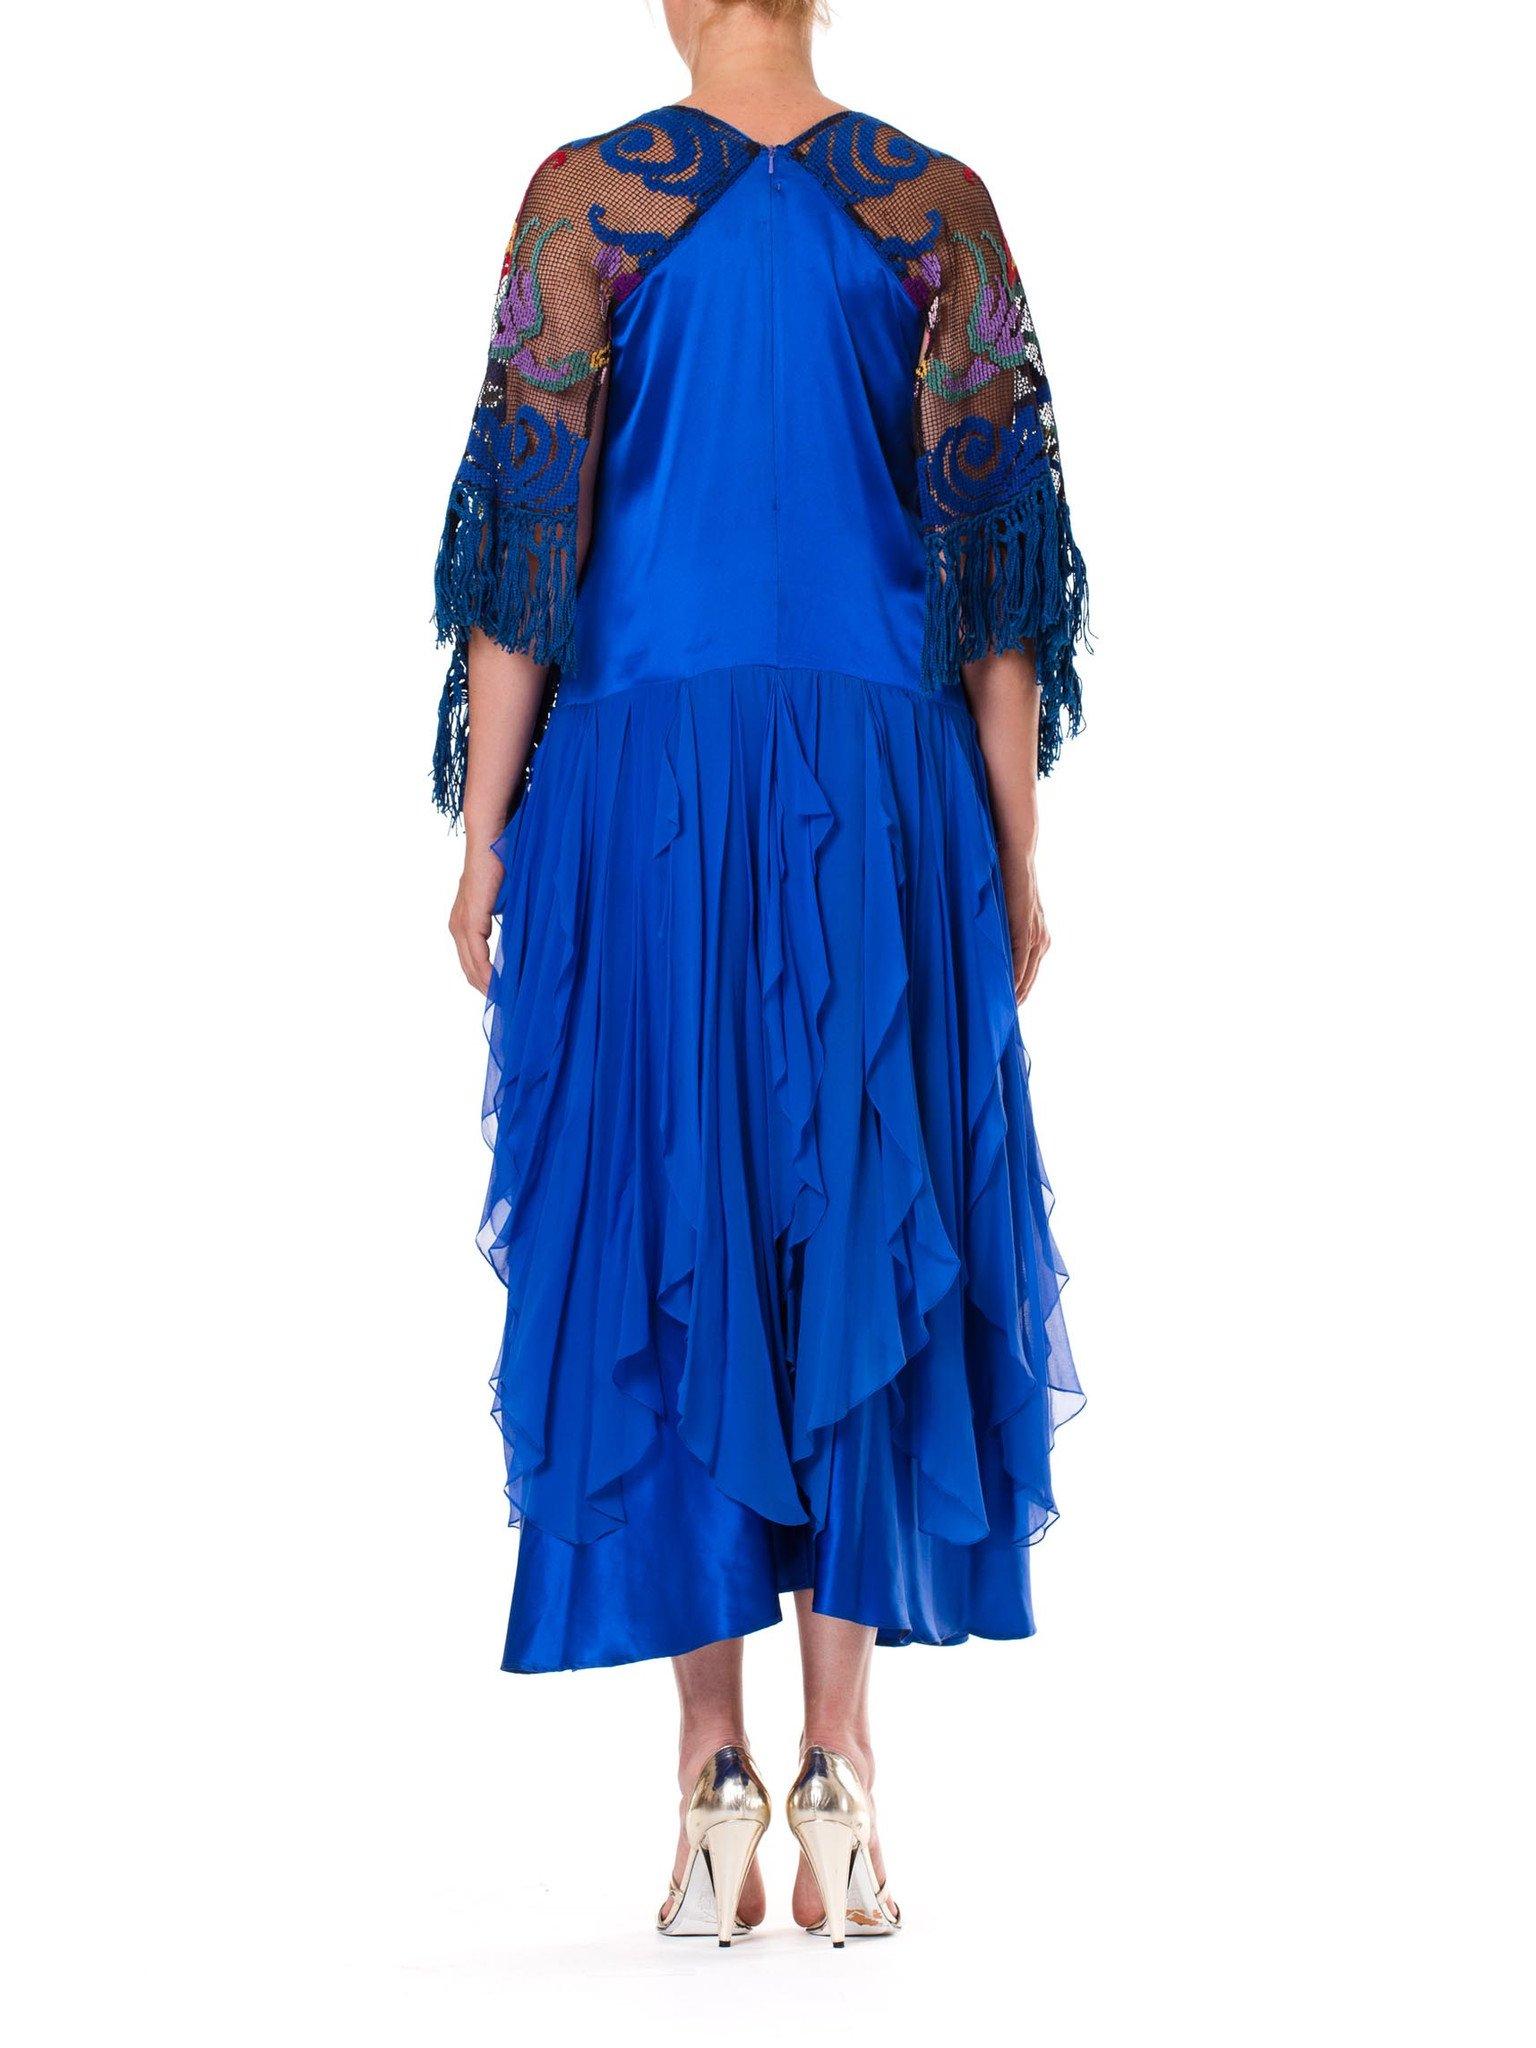 Blue Silk Charmeuse  & Chiffon Dress With Antique Lace Sleeves For Sale 1